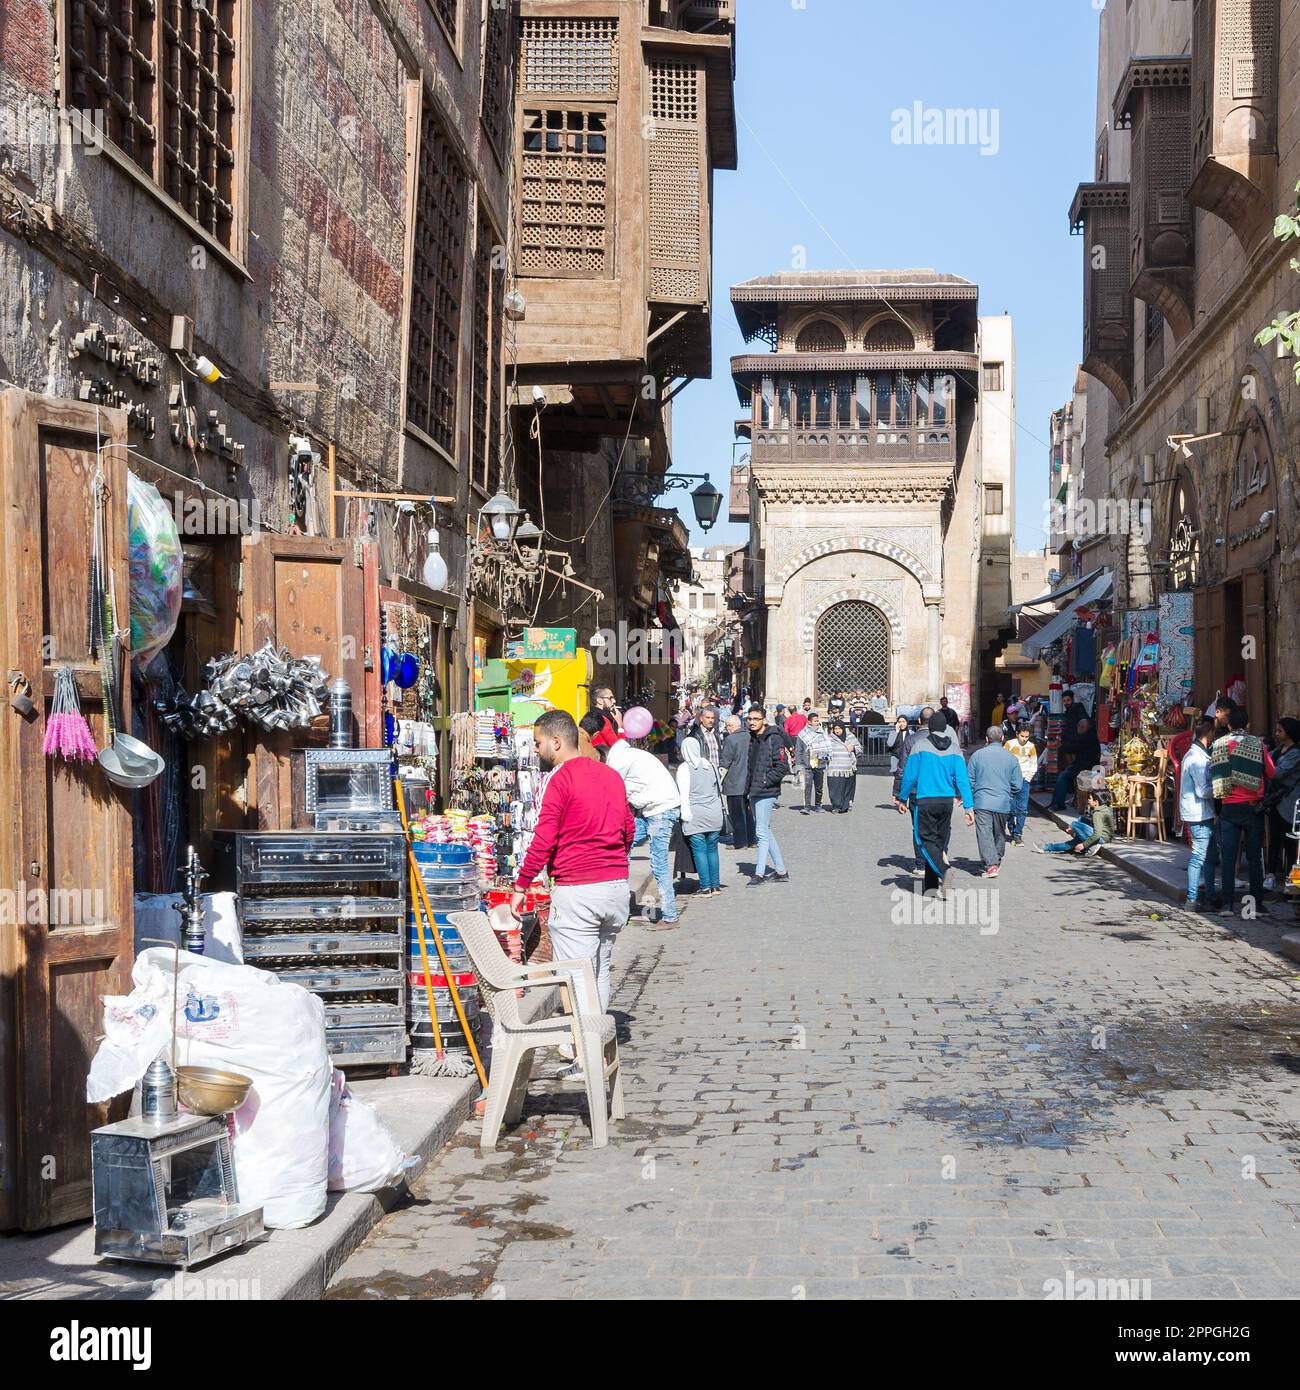 Moez Street with Sabil-Kuttab of Katkhuda historic building at the far end, Cairo, Egypt Stock Photo